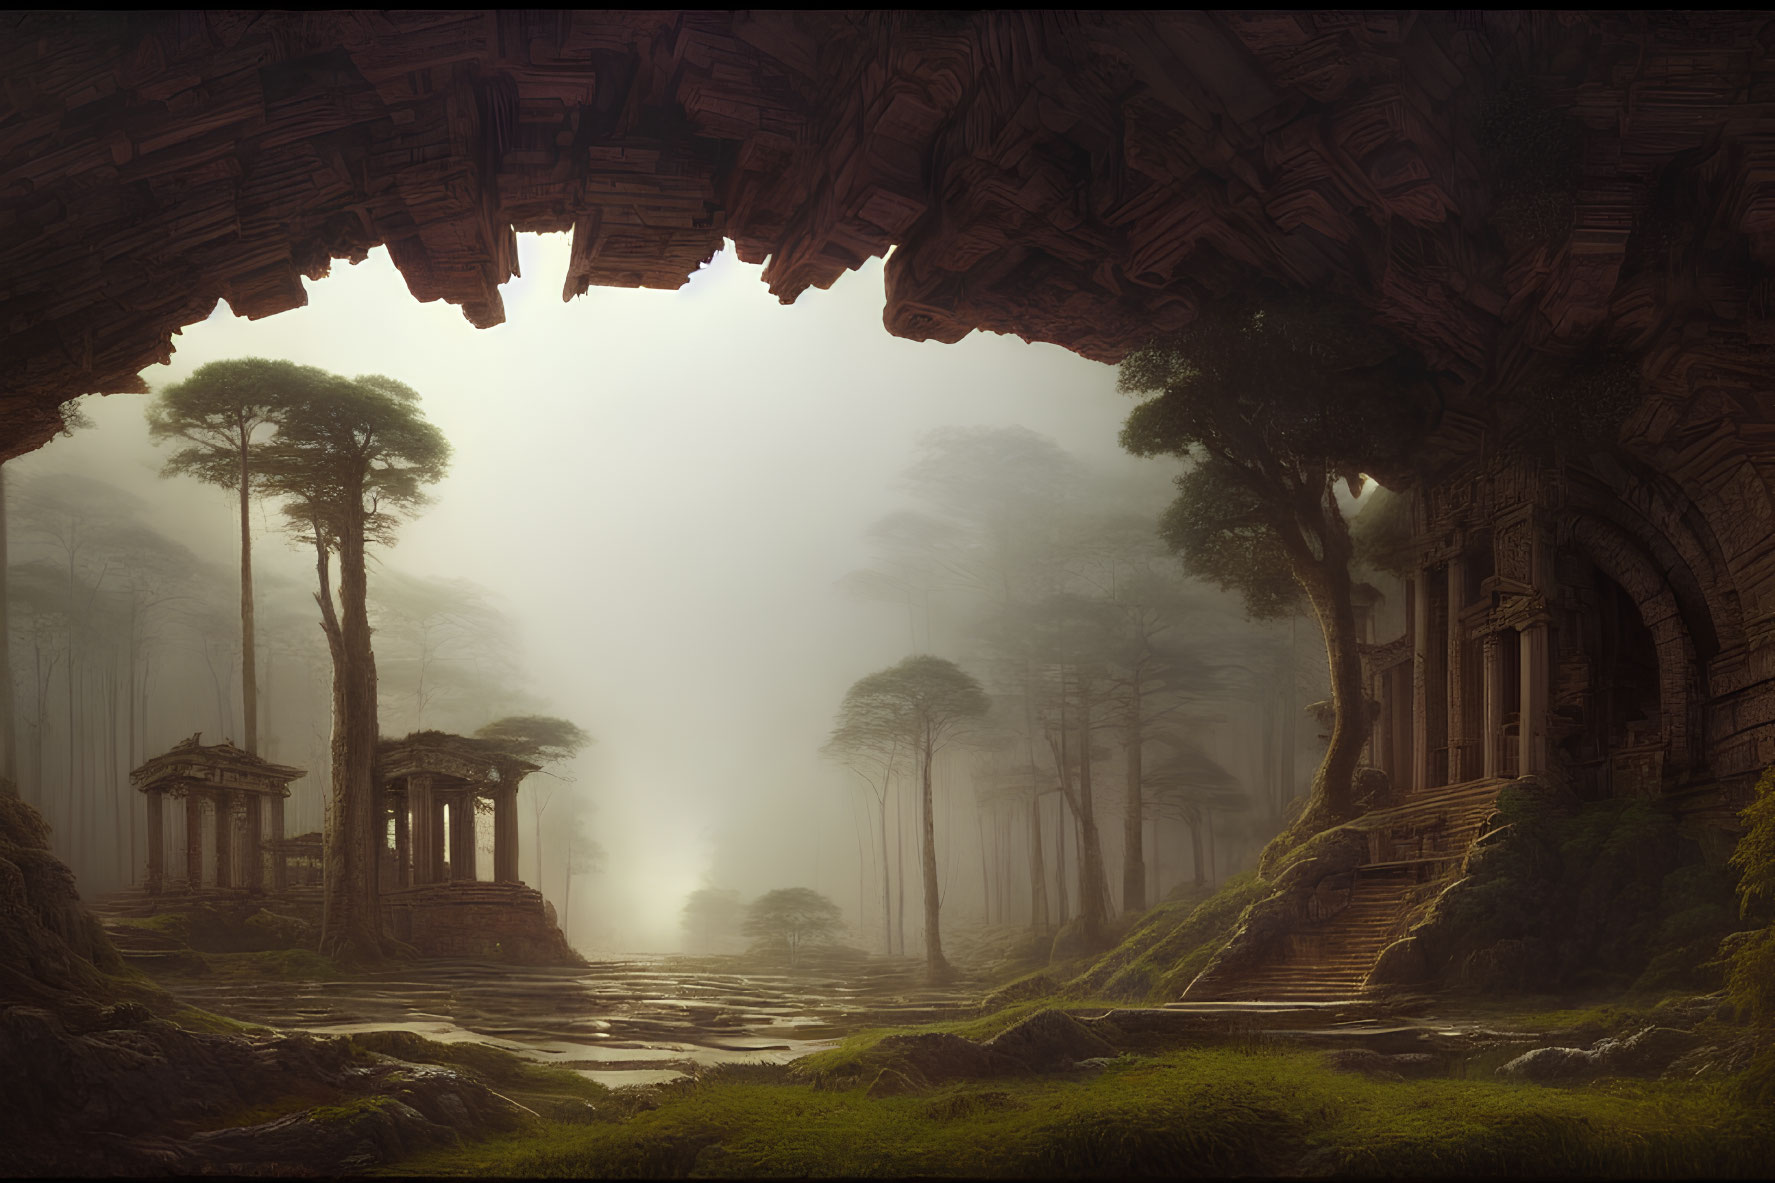 Ancient ruins and towering trees in misty forest scene